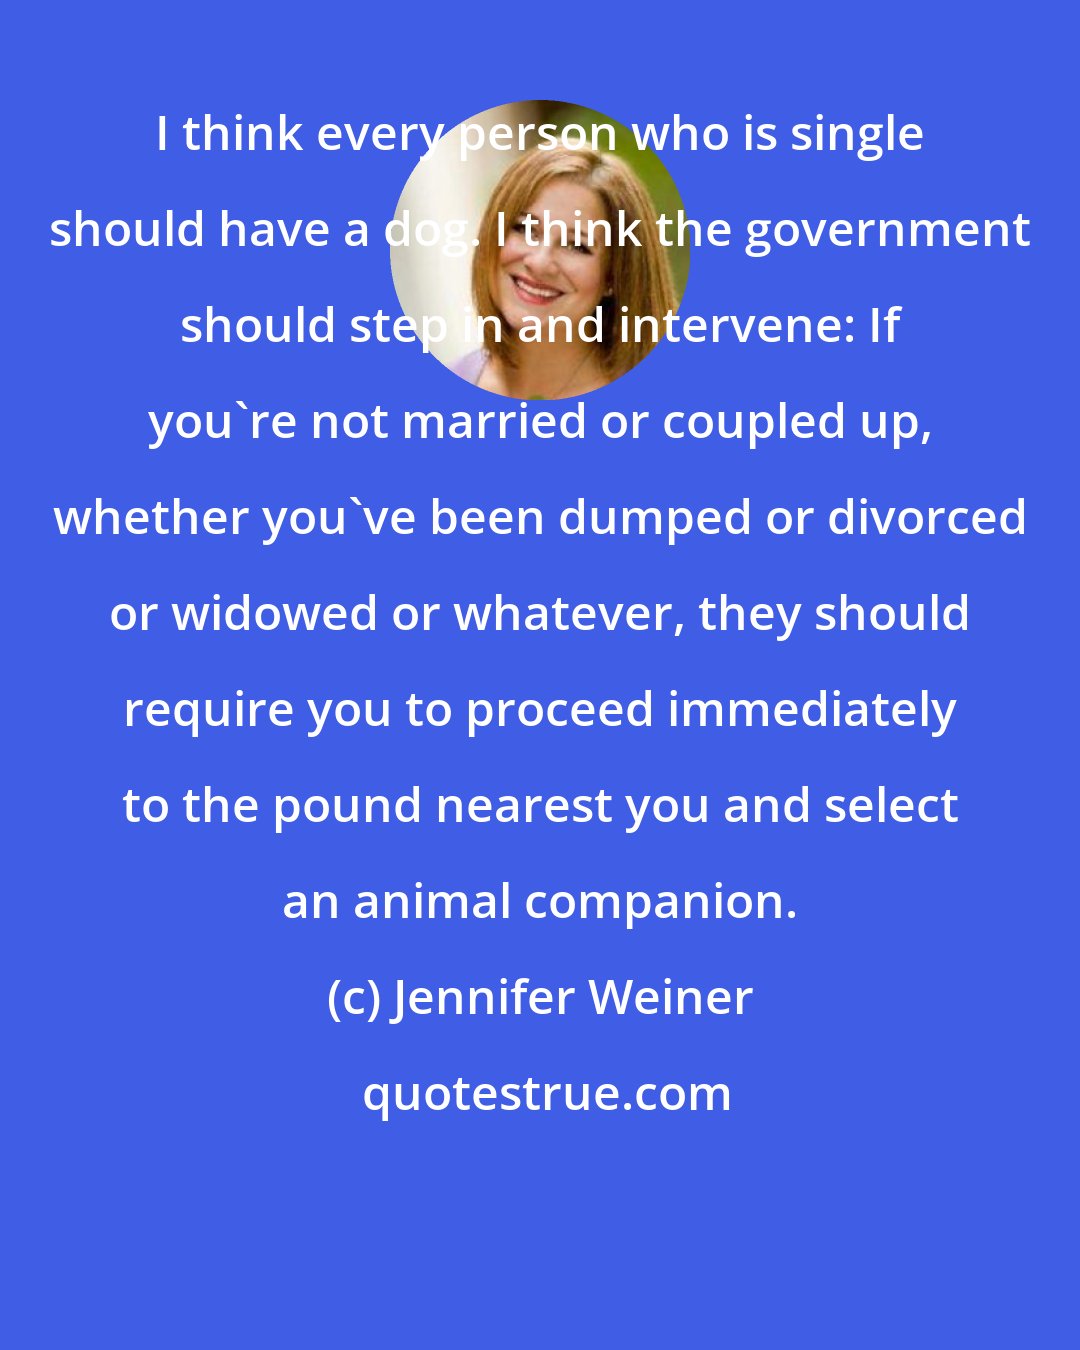 Jennifer Weiner: I think every person who is single should have a dog. I think the government should step in and intervene: If you're not married or coupled up, whether you've been dumped or divorced or widowed or whatever, they should require you to proceed immediately to the pound nearest you and select an animal companion.